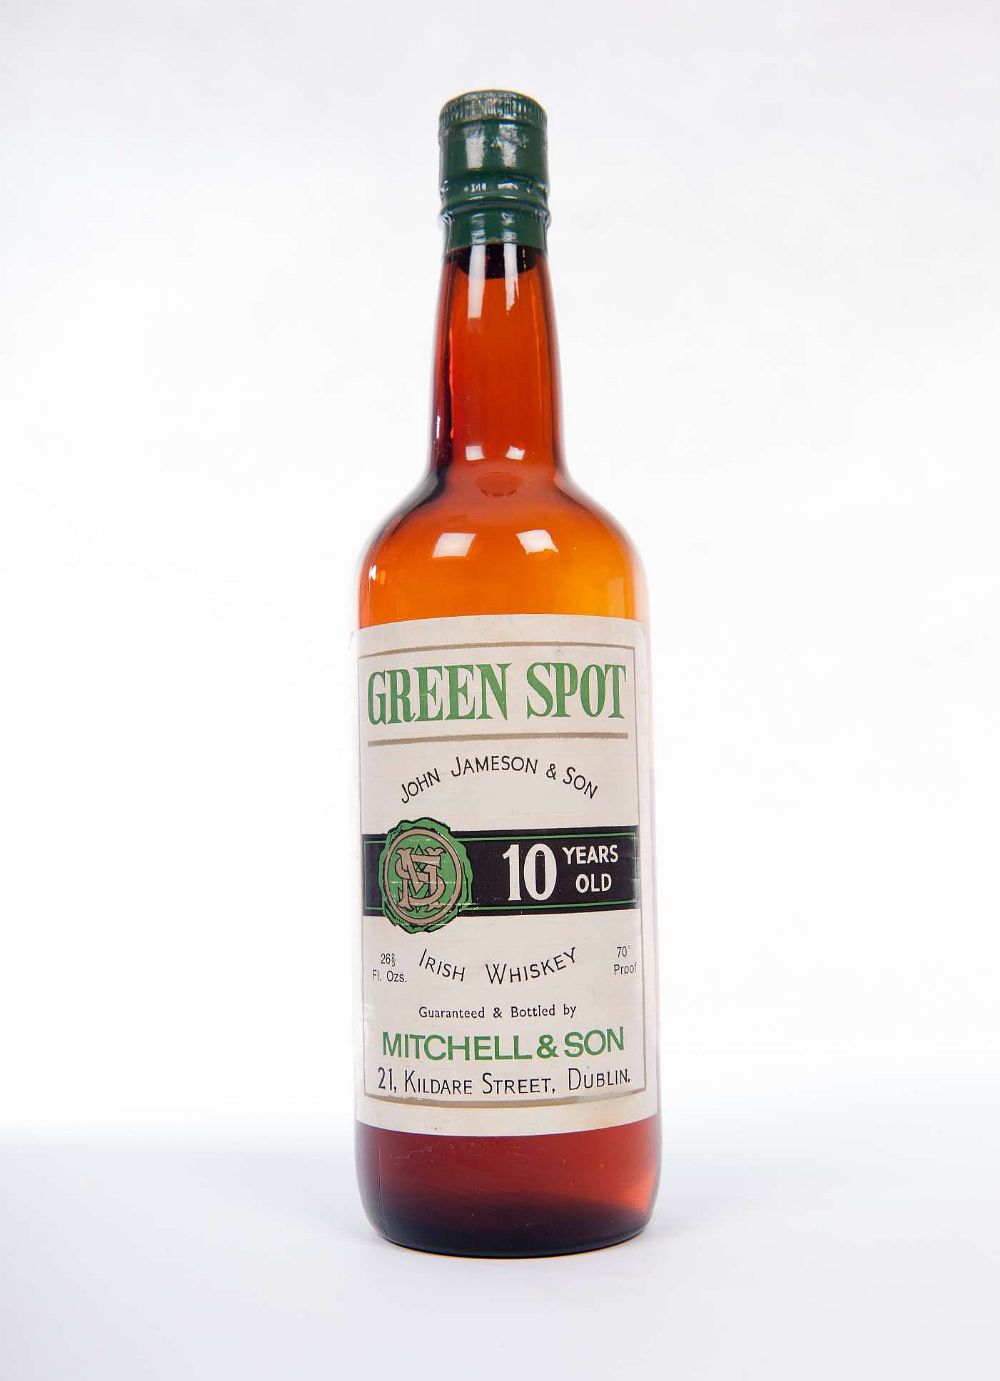 Green Spot 10 year old 75cl (old label, green cap)